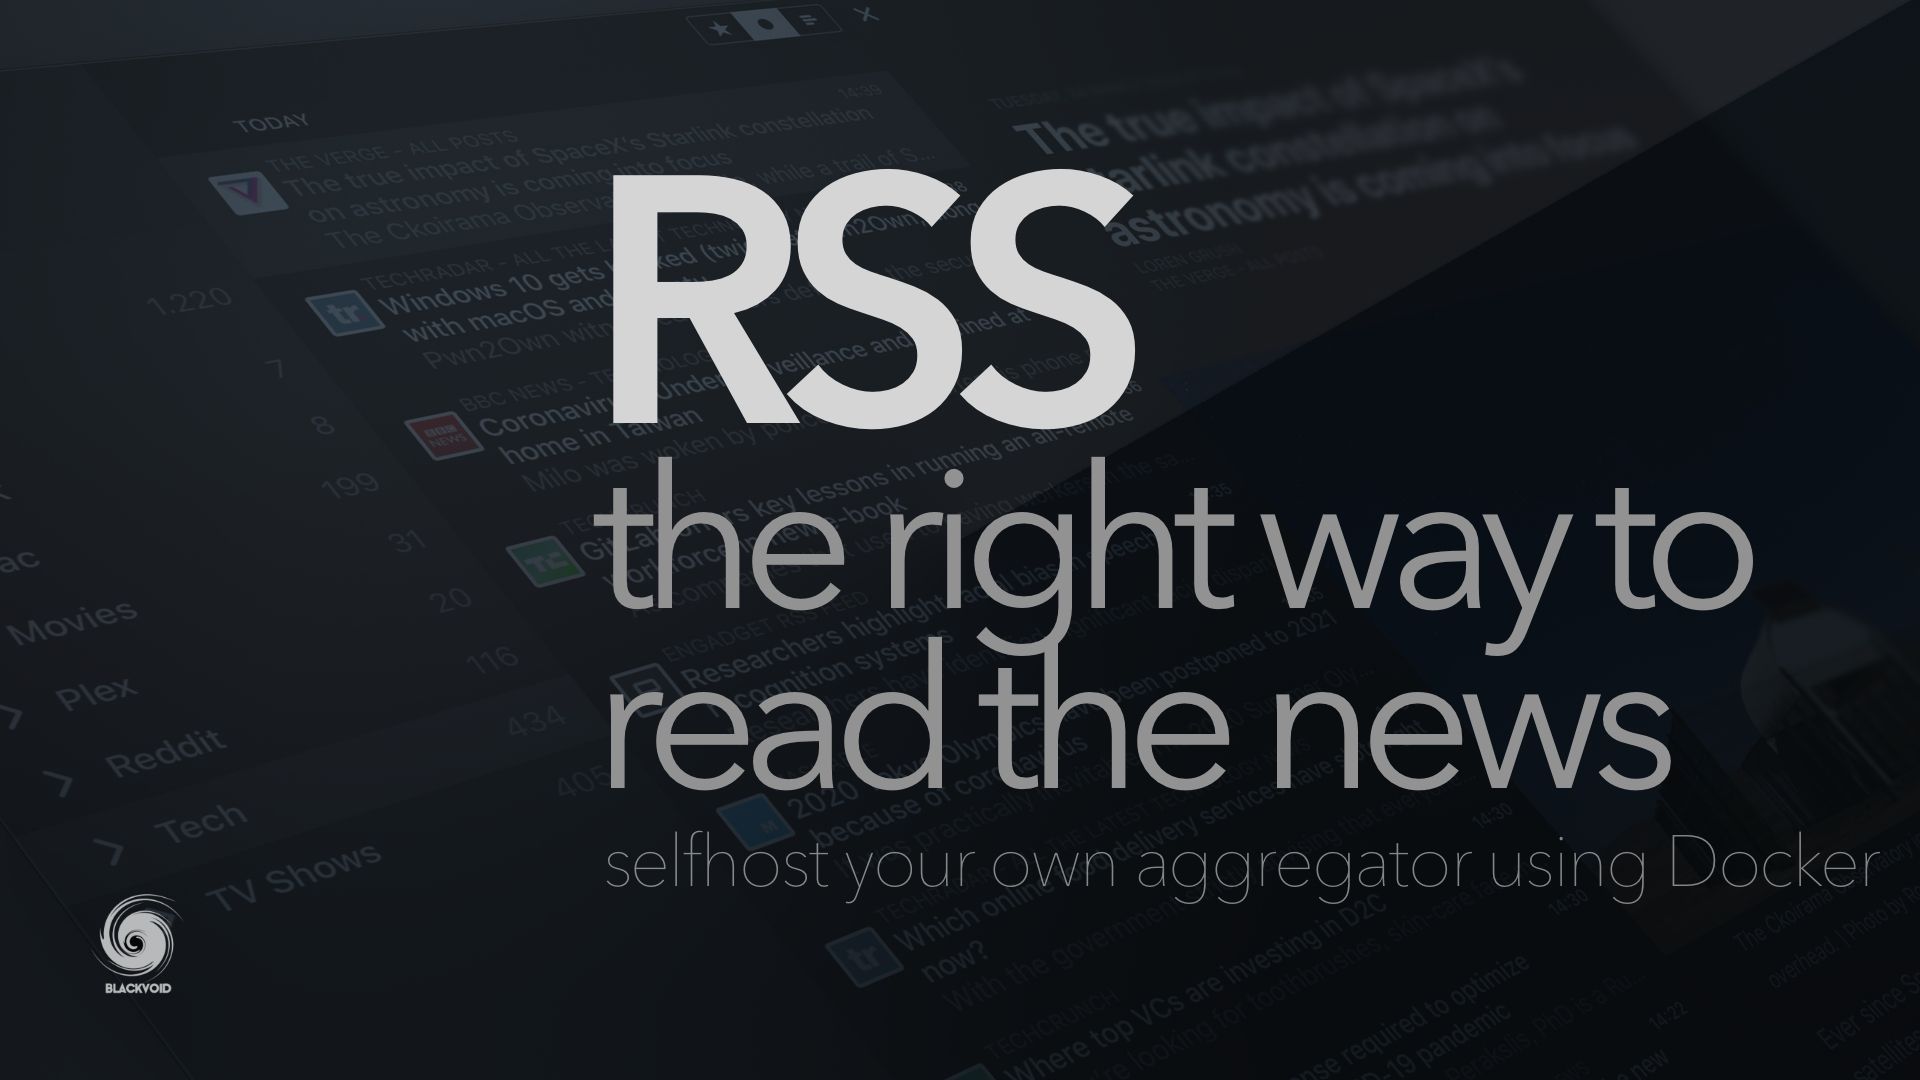 RSS - dying platform or the right way to read the news?